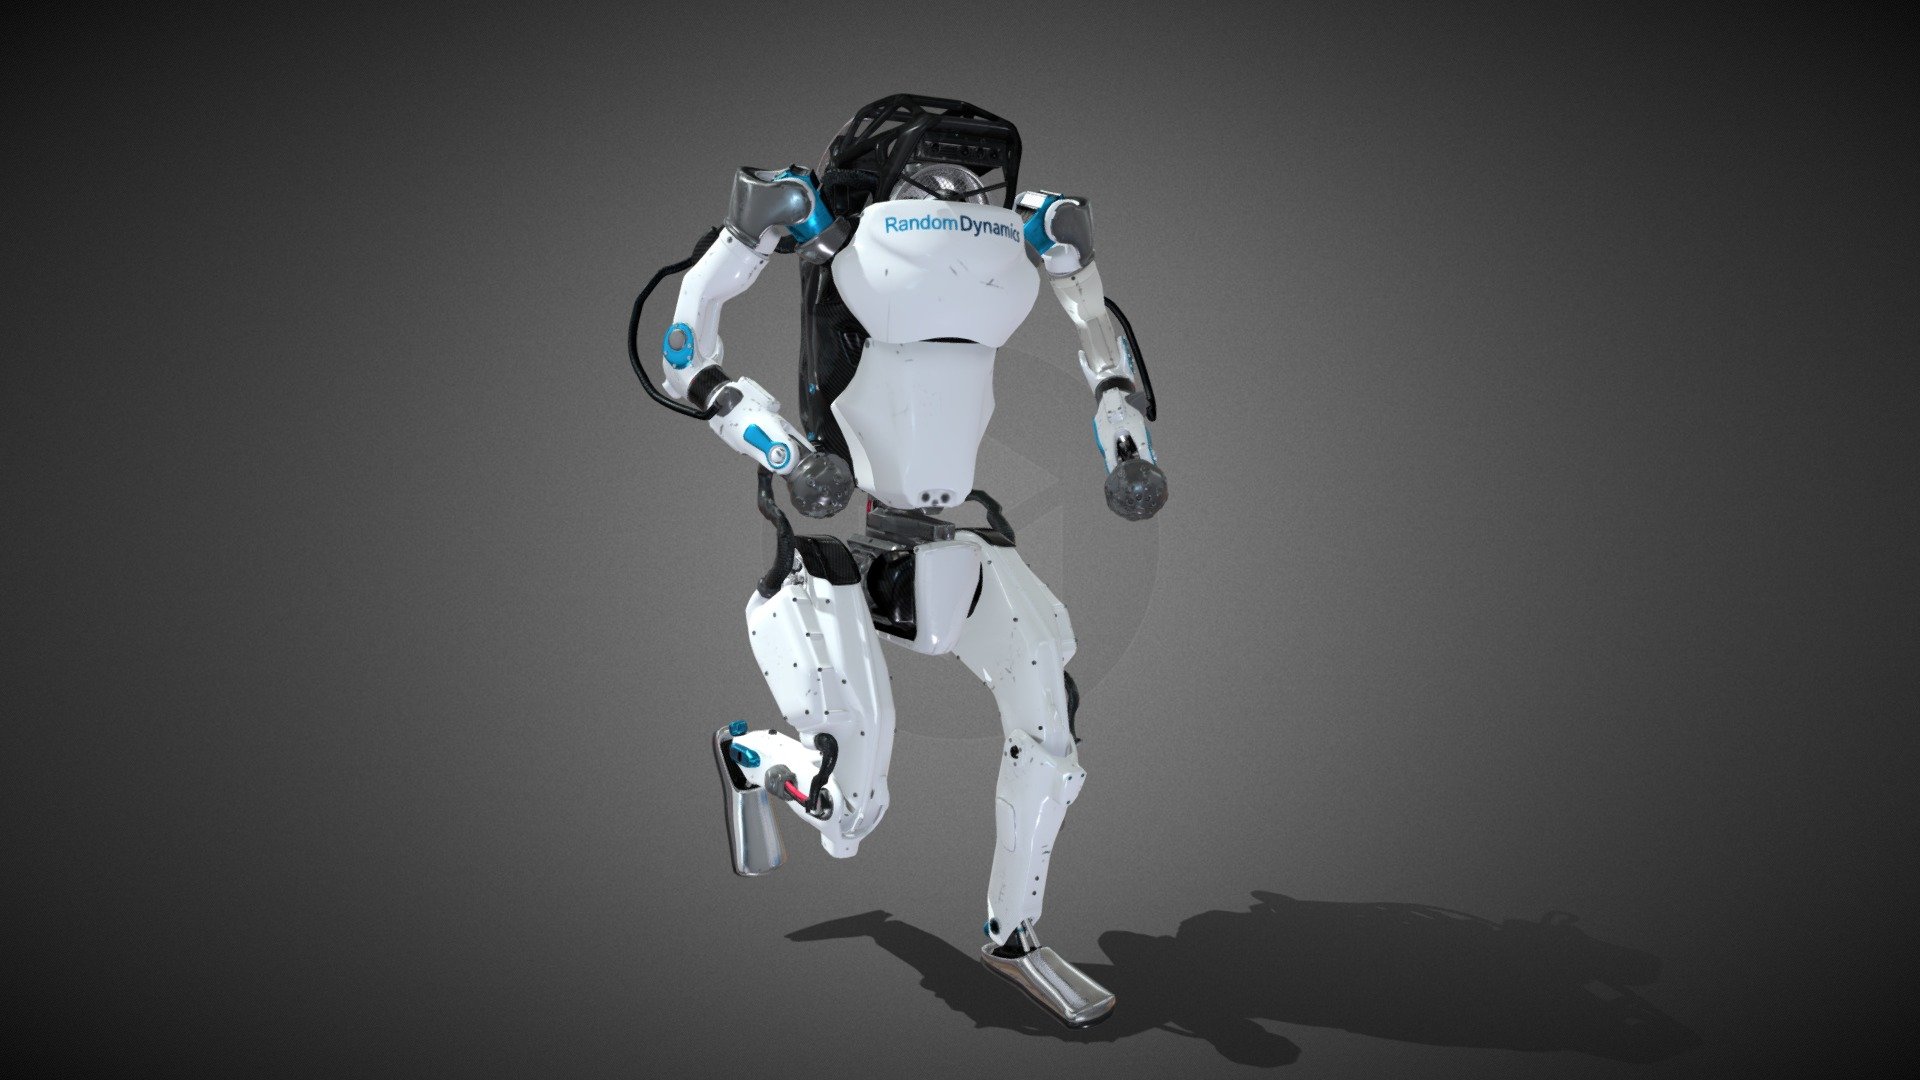 This is Random Represent version of Atlas the robot of bosto dynamics animated.
FBX format.
Unwrapped UV.
PBR material.
Textures and maps 4096x4096 resolution in .png file format.
Included texture maps: Diffuse, Normal, Ambient Occlusion, Specular, Roughness 3d model